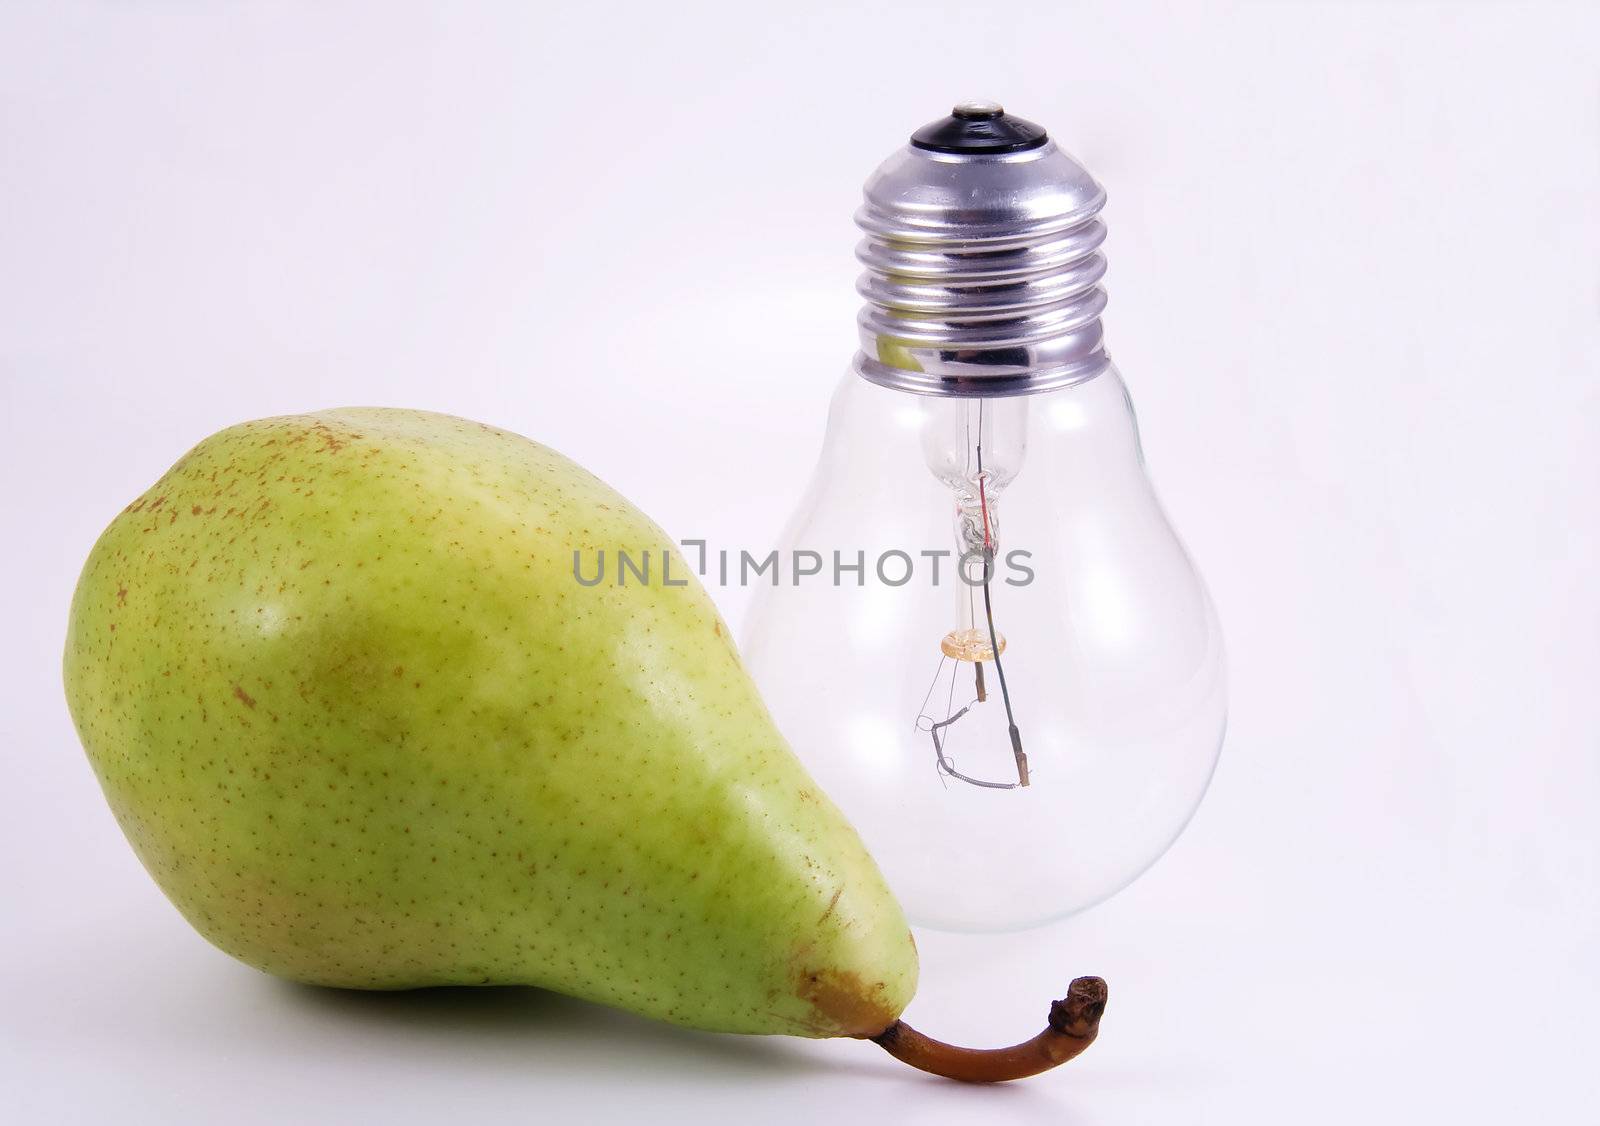 Green pear and electric bulb on white background